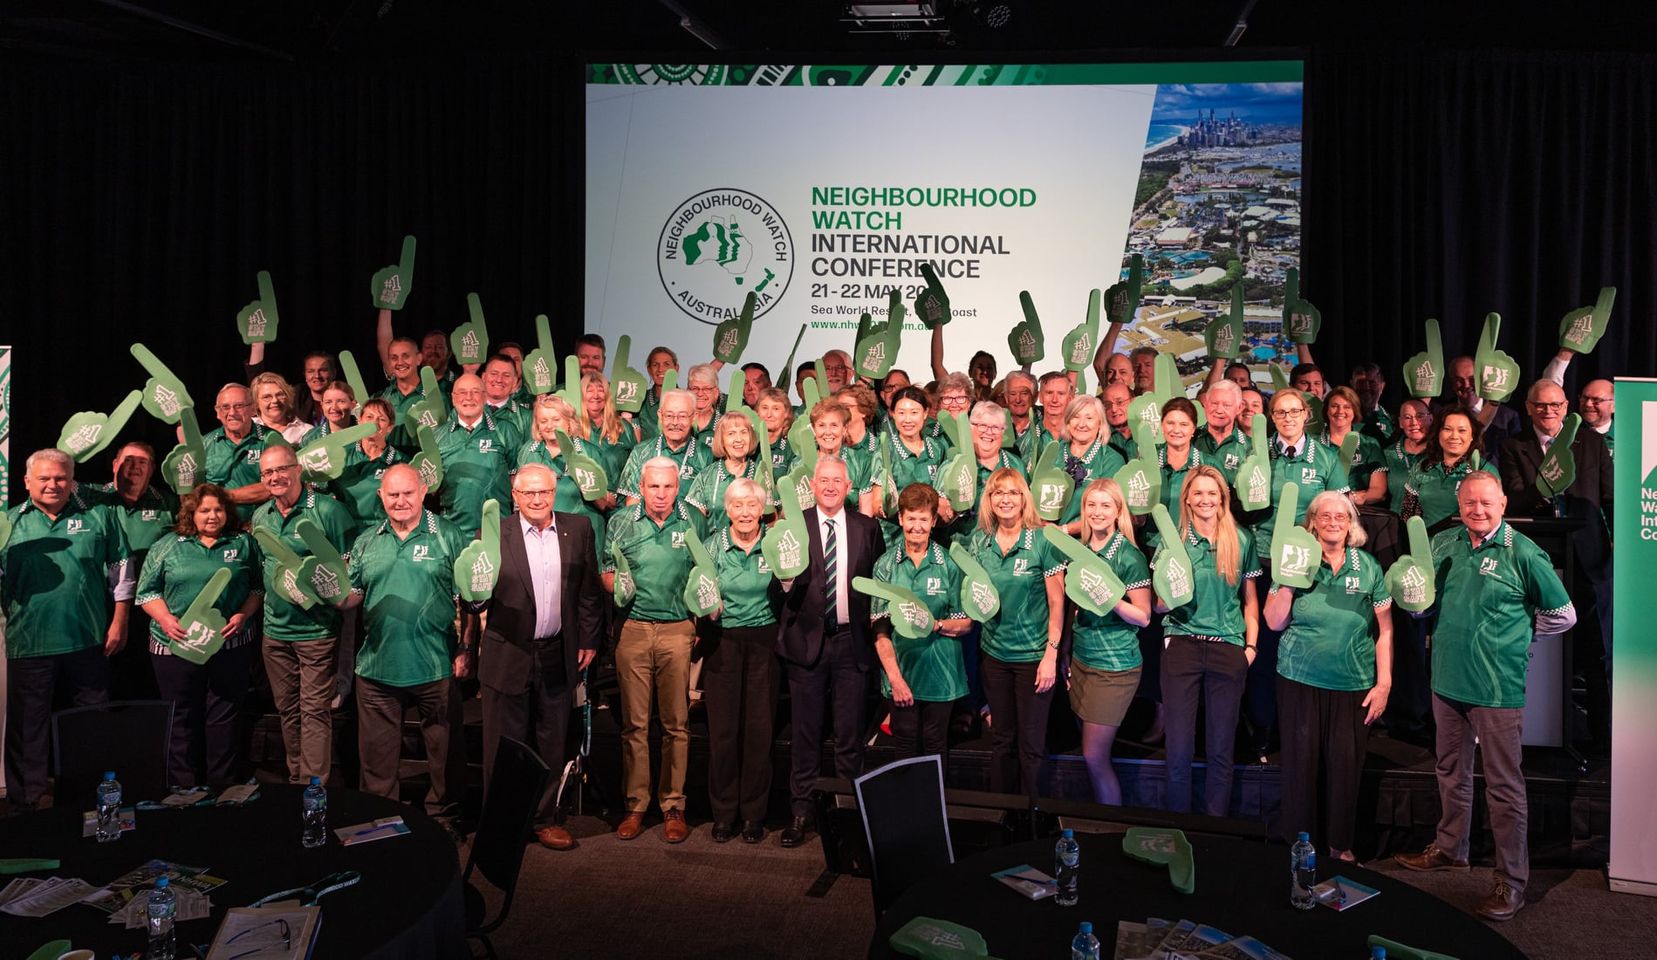 The NHW portfolio attended the NHW International Conference in May 2021.